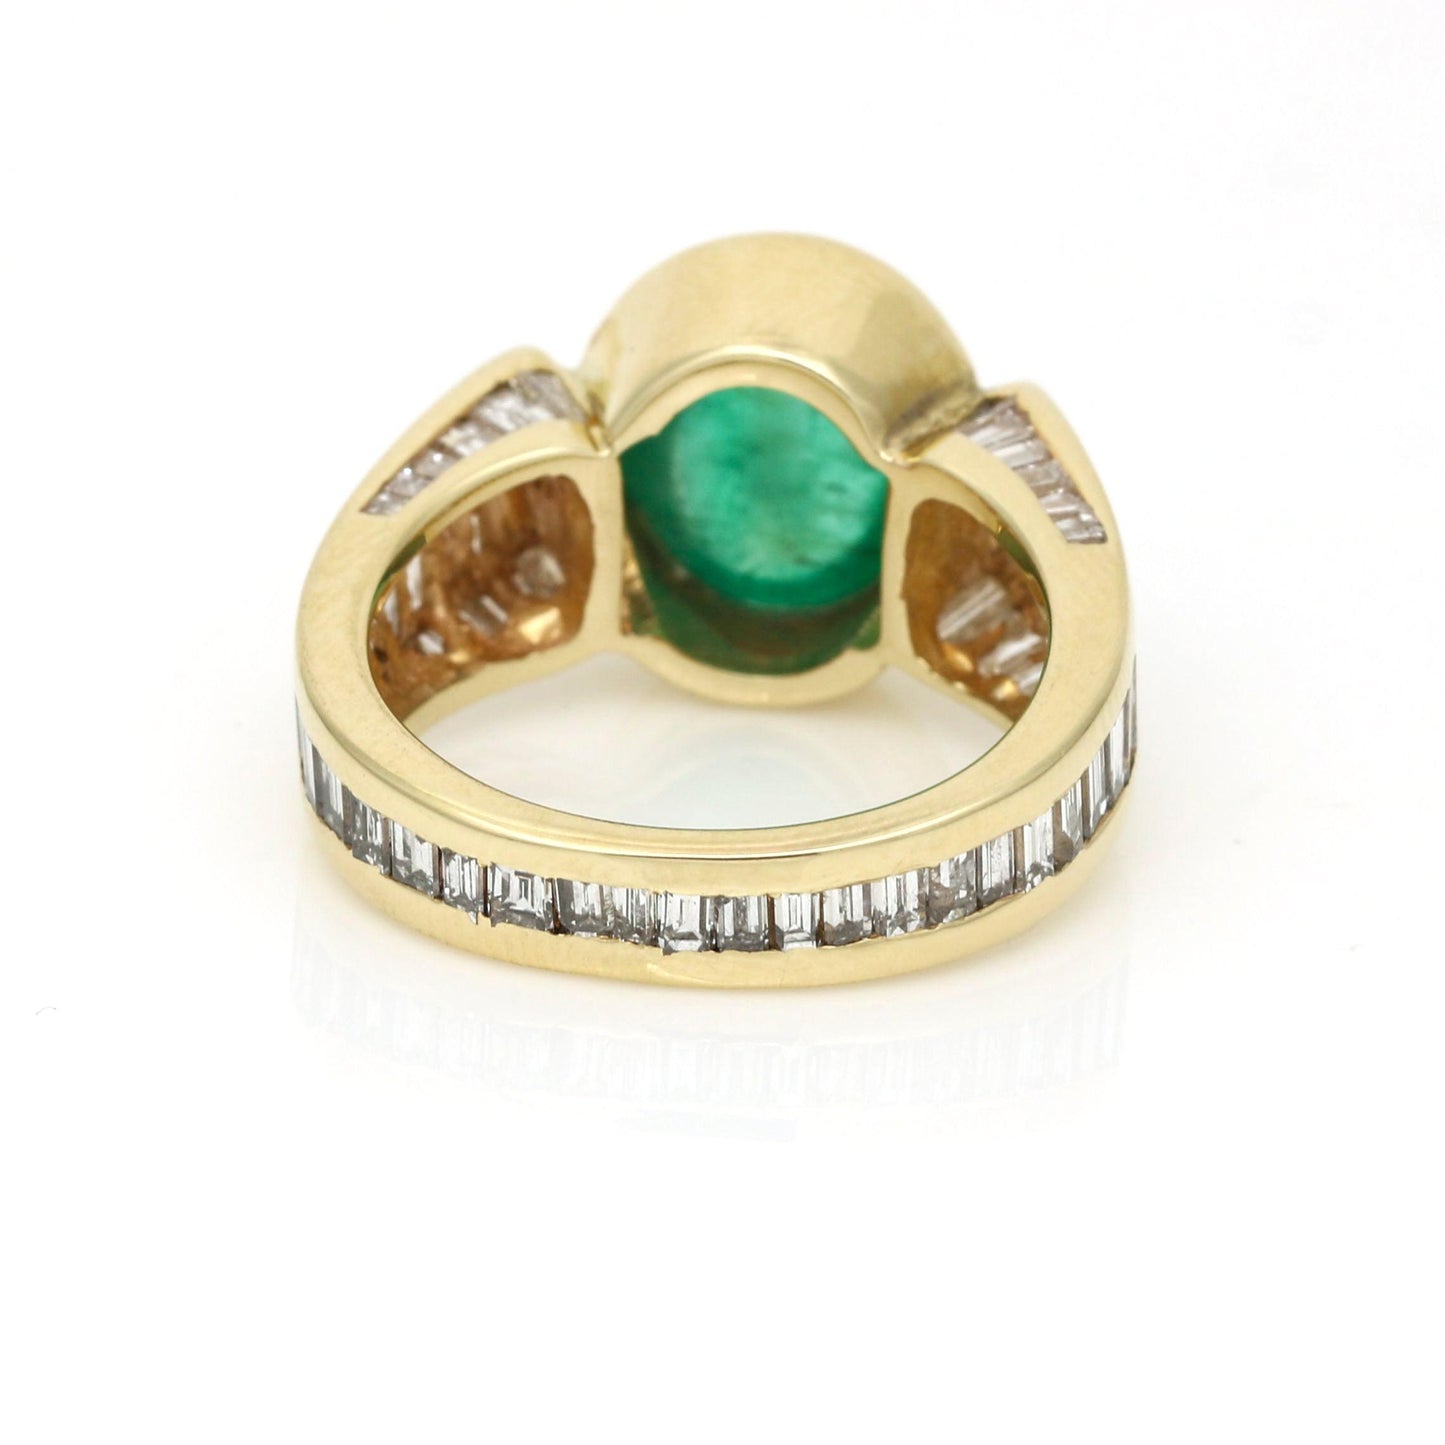 Cabochon Colombian Emerald Diamond Statement Ring in 14k Yellow Gold - 31 Jewels Inc.